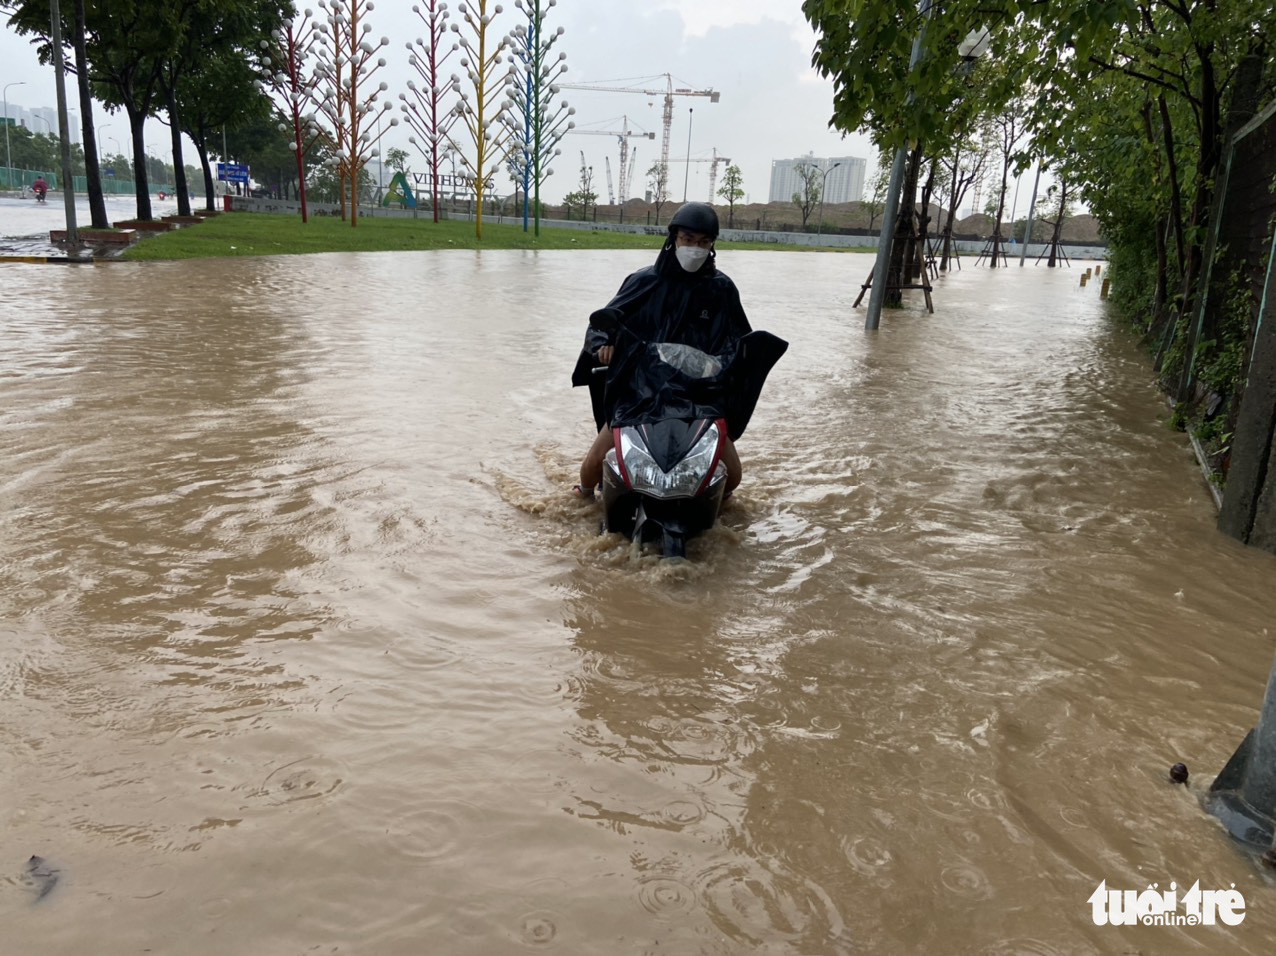 A person rides their motorbike through a flooded area in Nam Tu Liem District, Hanoi, May 29, 2022. Photo: Quang The / Tuoi Tre